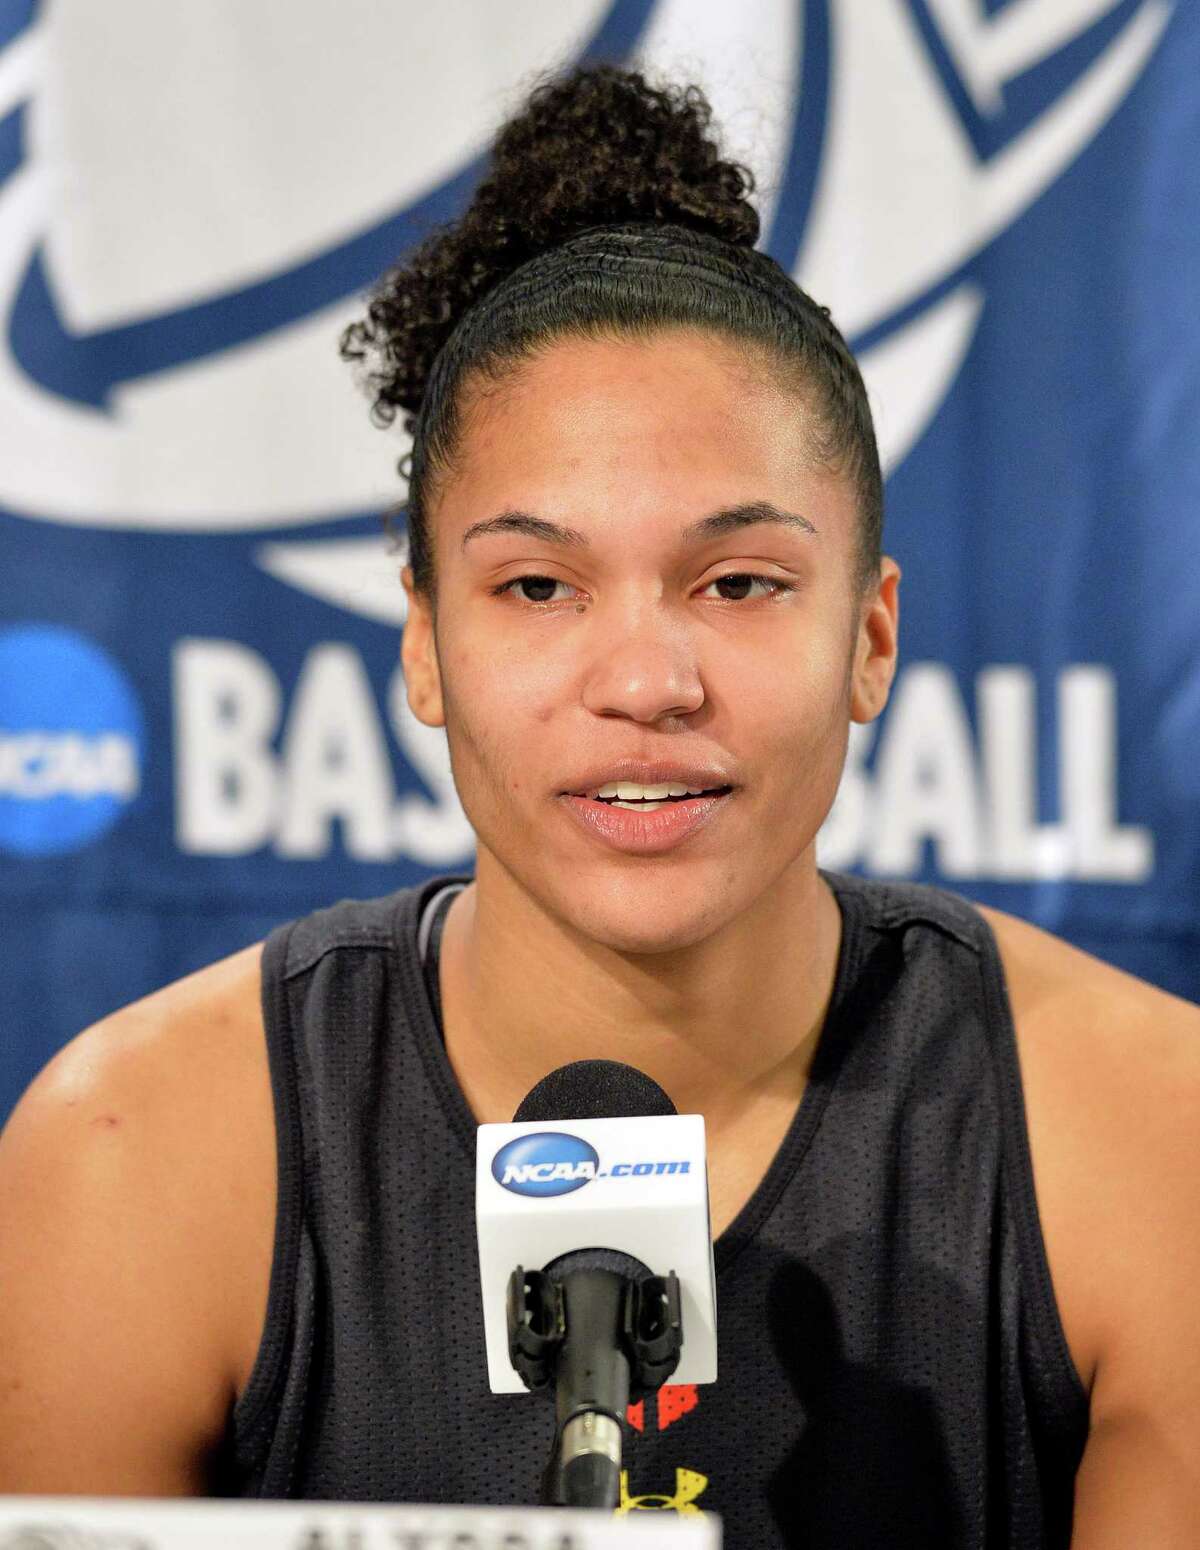 Maryland's Alyssa Thomas speaks during a news conference at the NCAA college basketball tournament in Louisville, Ky., Saturday, March 29, 2014. Maryland plays Tennessee in a regional semifinal on Sunday. (AP Photo/Timothy D. Easley)